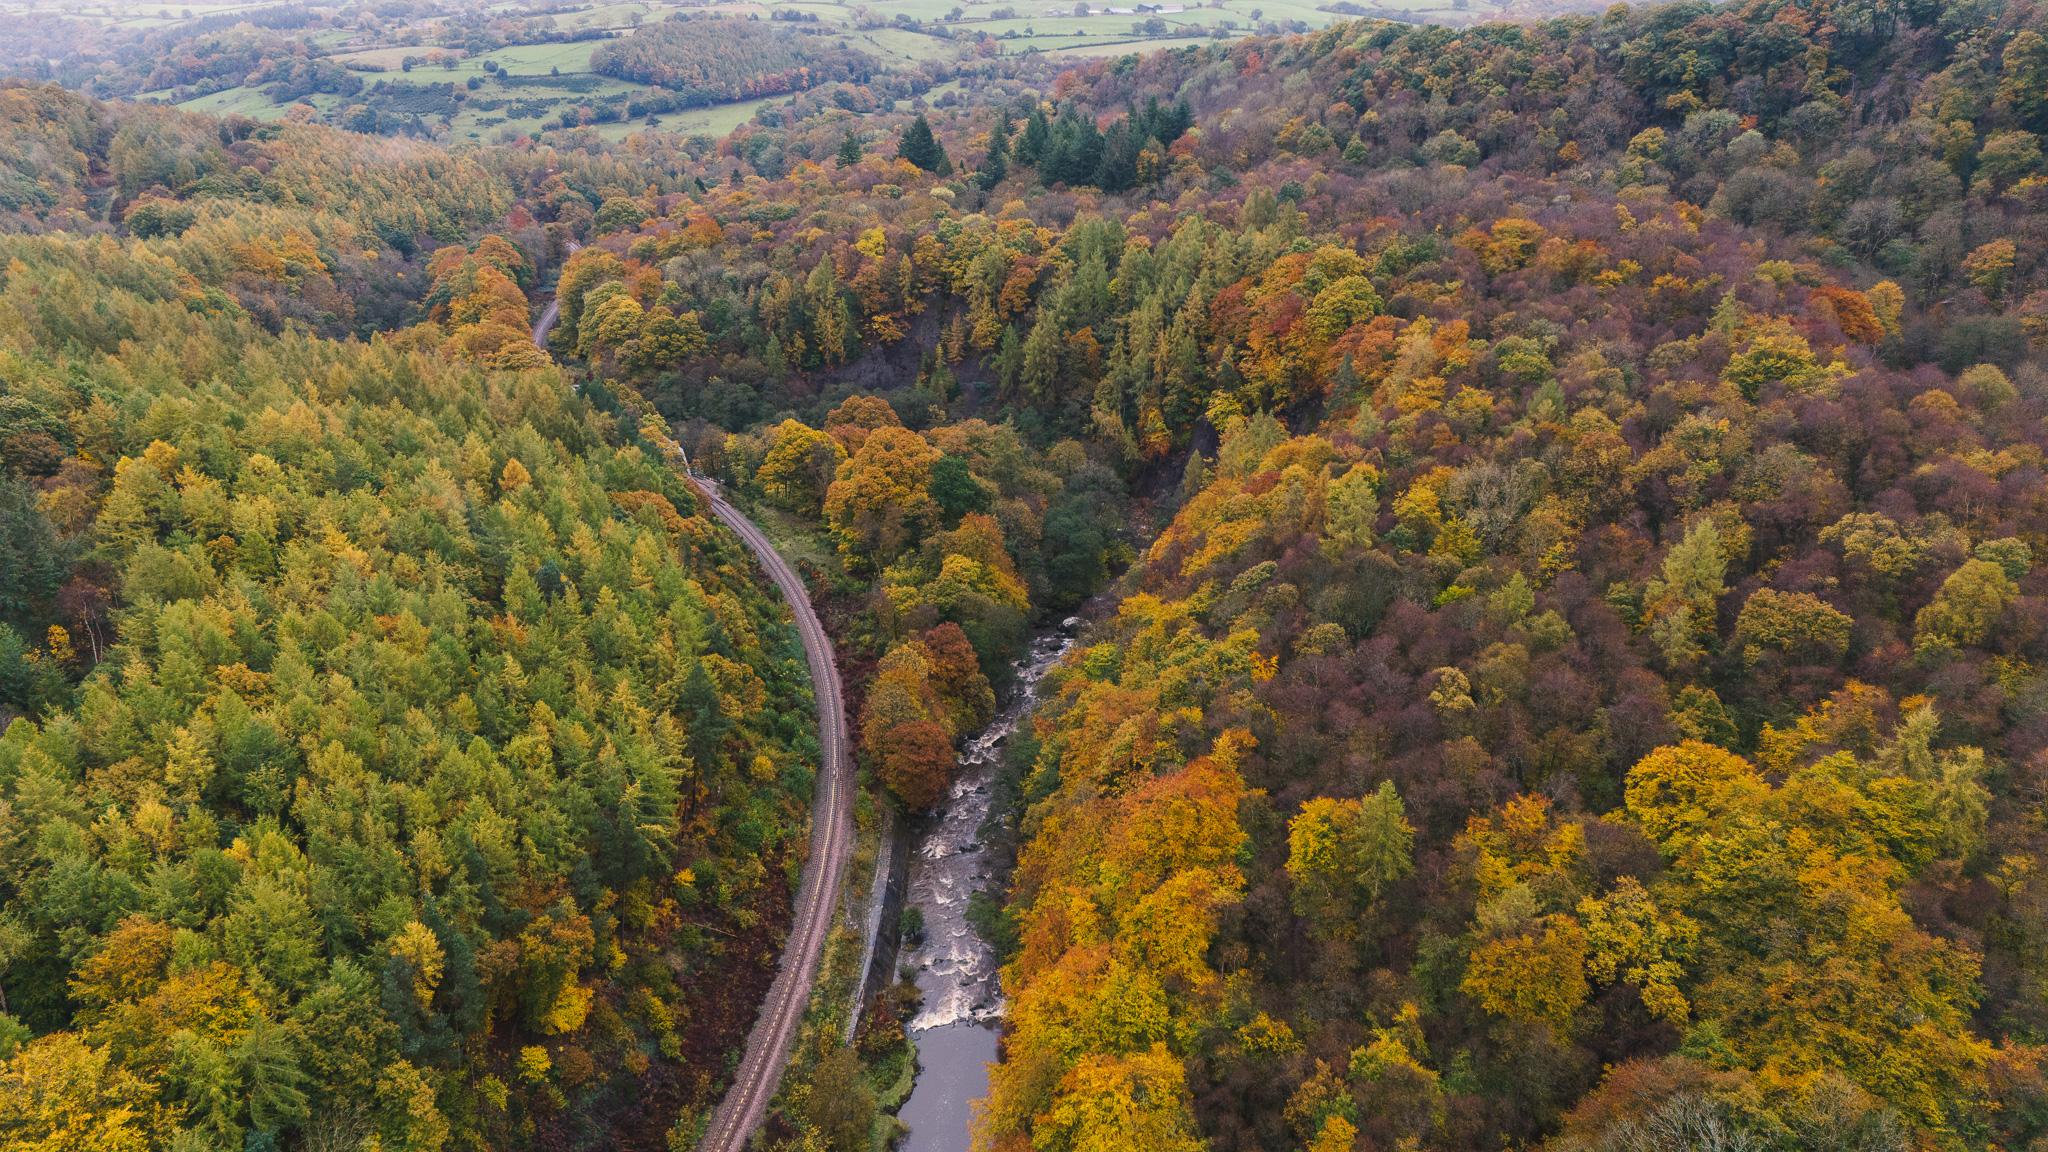 The area of Glaisdale, featured on the Grosmont Gravel Loop. Photo: Markus Stitz